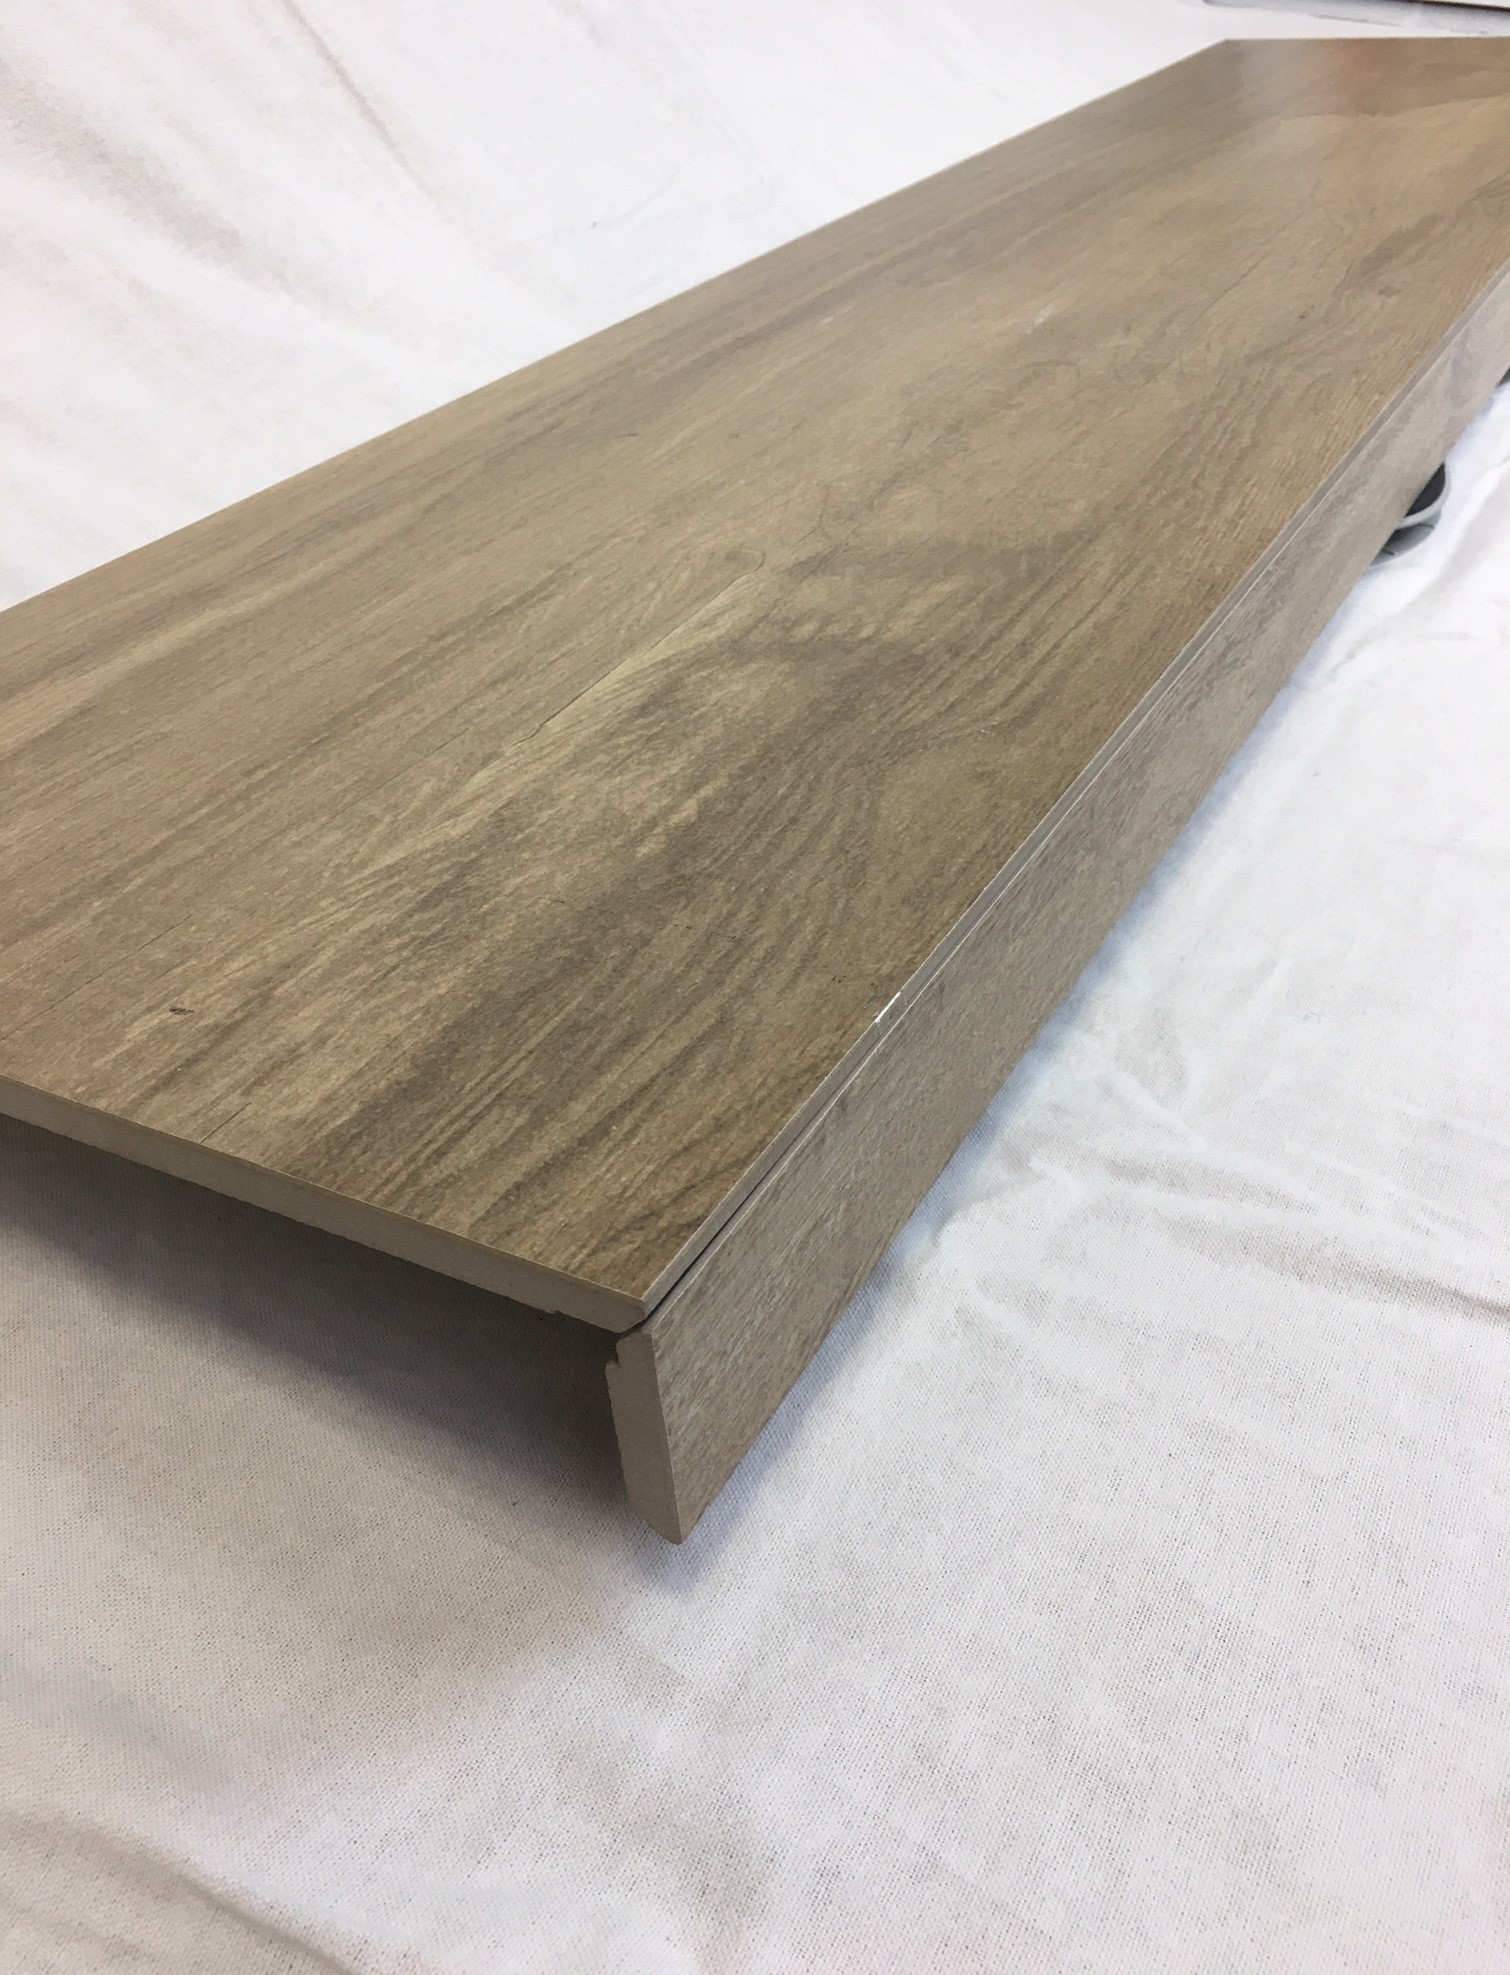 Oak Wood-Effect Linear Leather Step 30x120 with 5cm flap.
